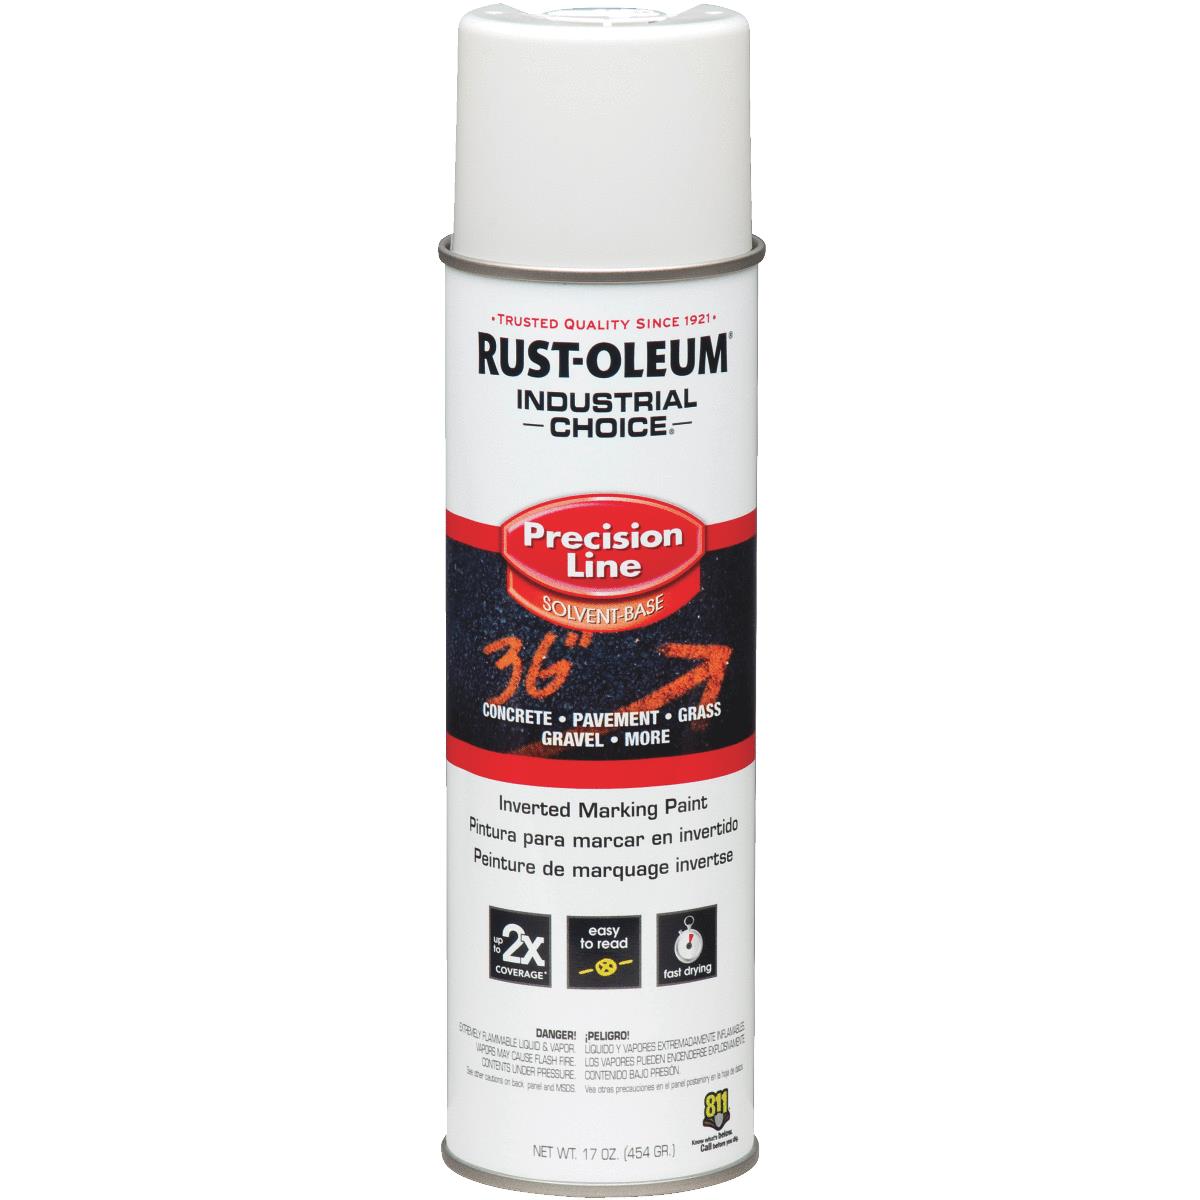 Rust-Oleum 249844 Painter's Touch 2x Ultra Cover Spray Paint, 12 oz, Satin Canyon Black